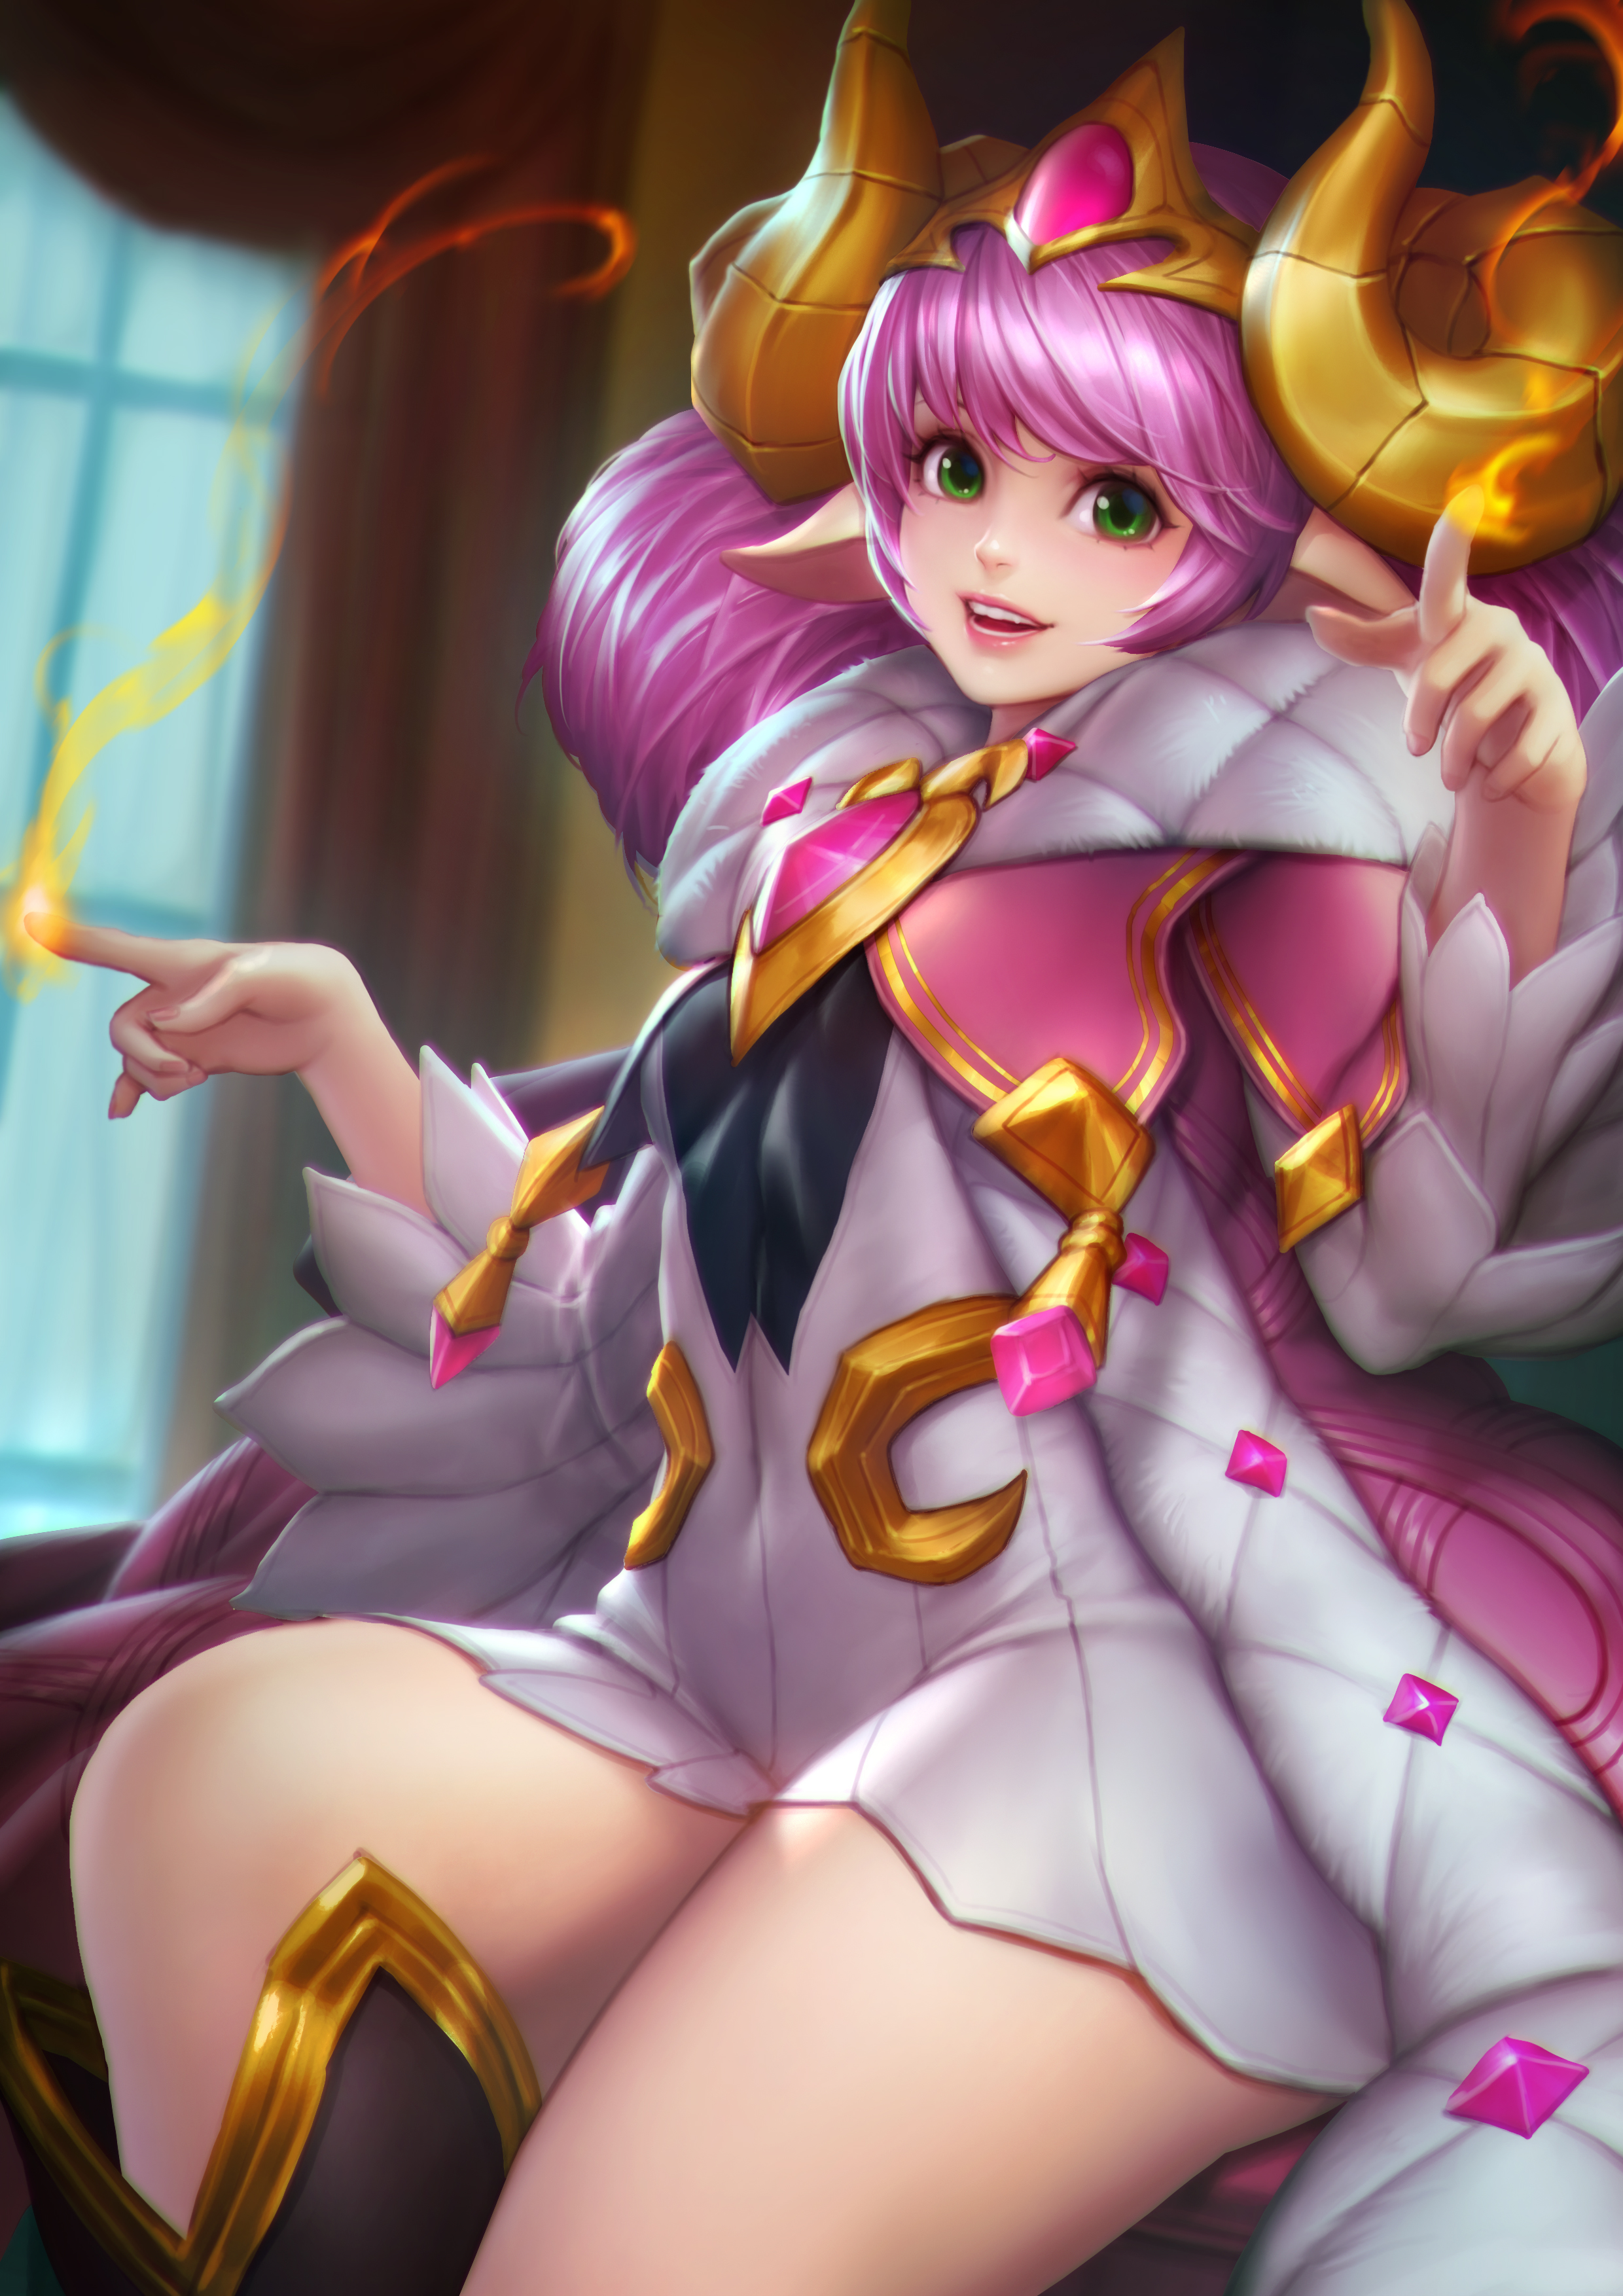 Anime 2480x3508 Arena of Valor Alice video games video game characters video game girls women fantasy girl horns pink hair fire dress jewelry sitting thick thigh coats green eyes looking at viewer smiling depth of field portrait display artwork drawing digital art illustration 2D fan art NeoArtCorE (artist) anime girls anime